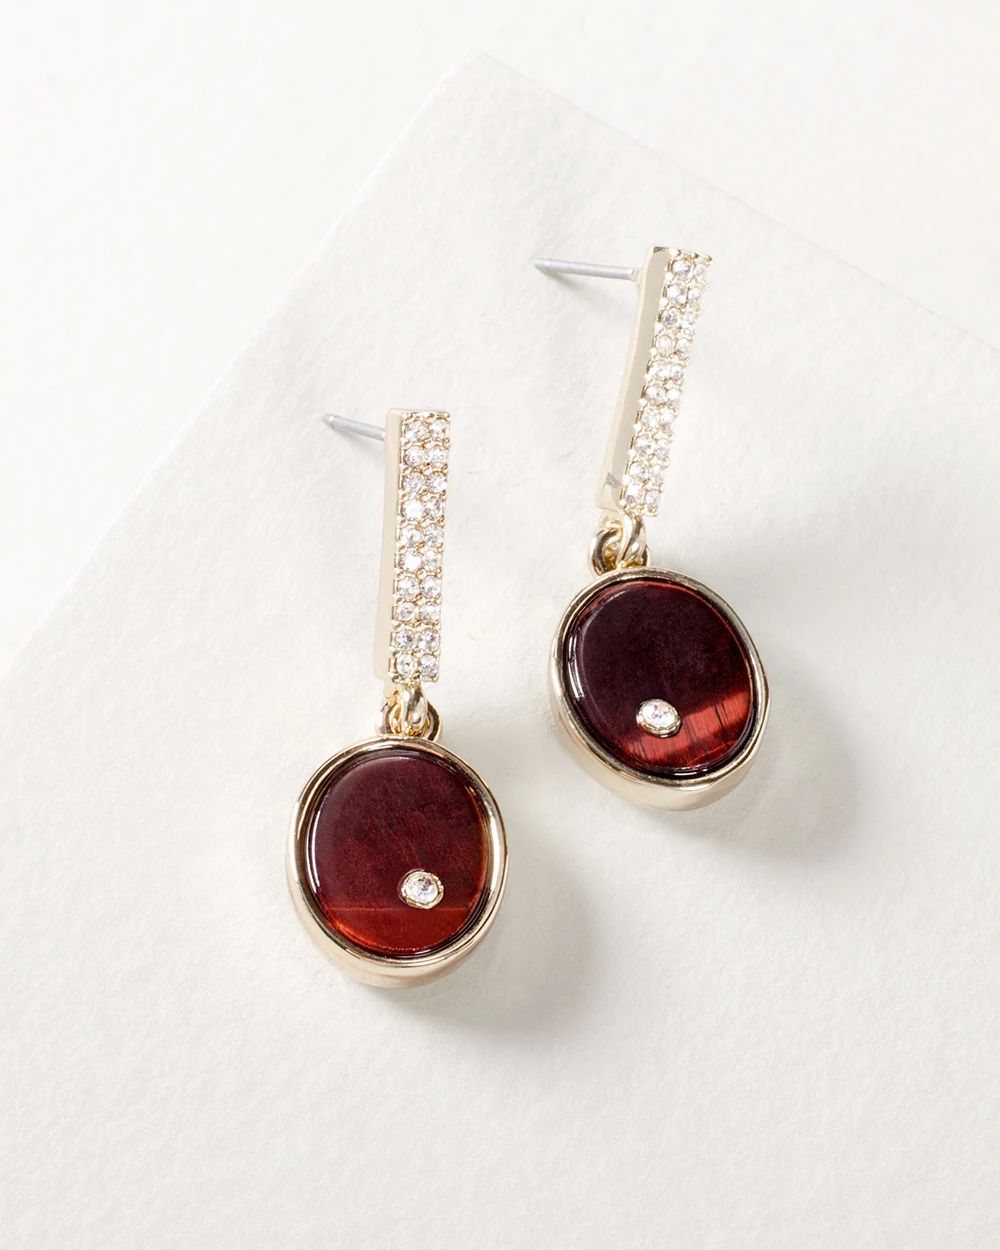 Goldtone Red Tiger Eye Drop Earrings click to view larger image.